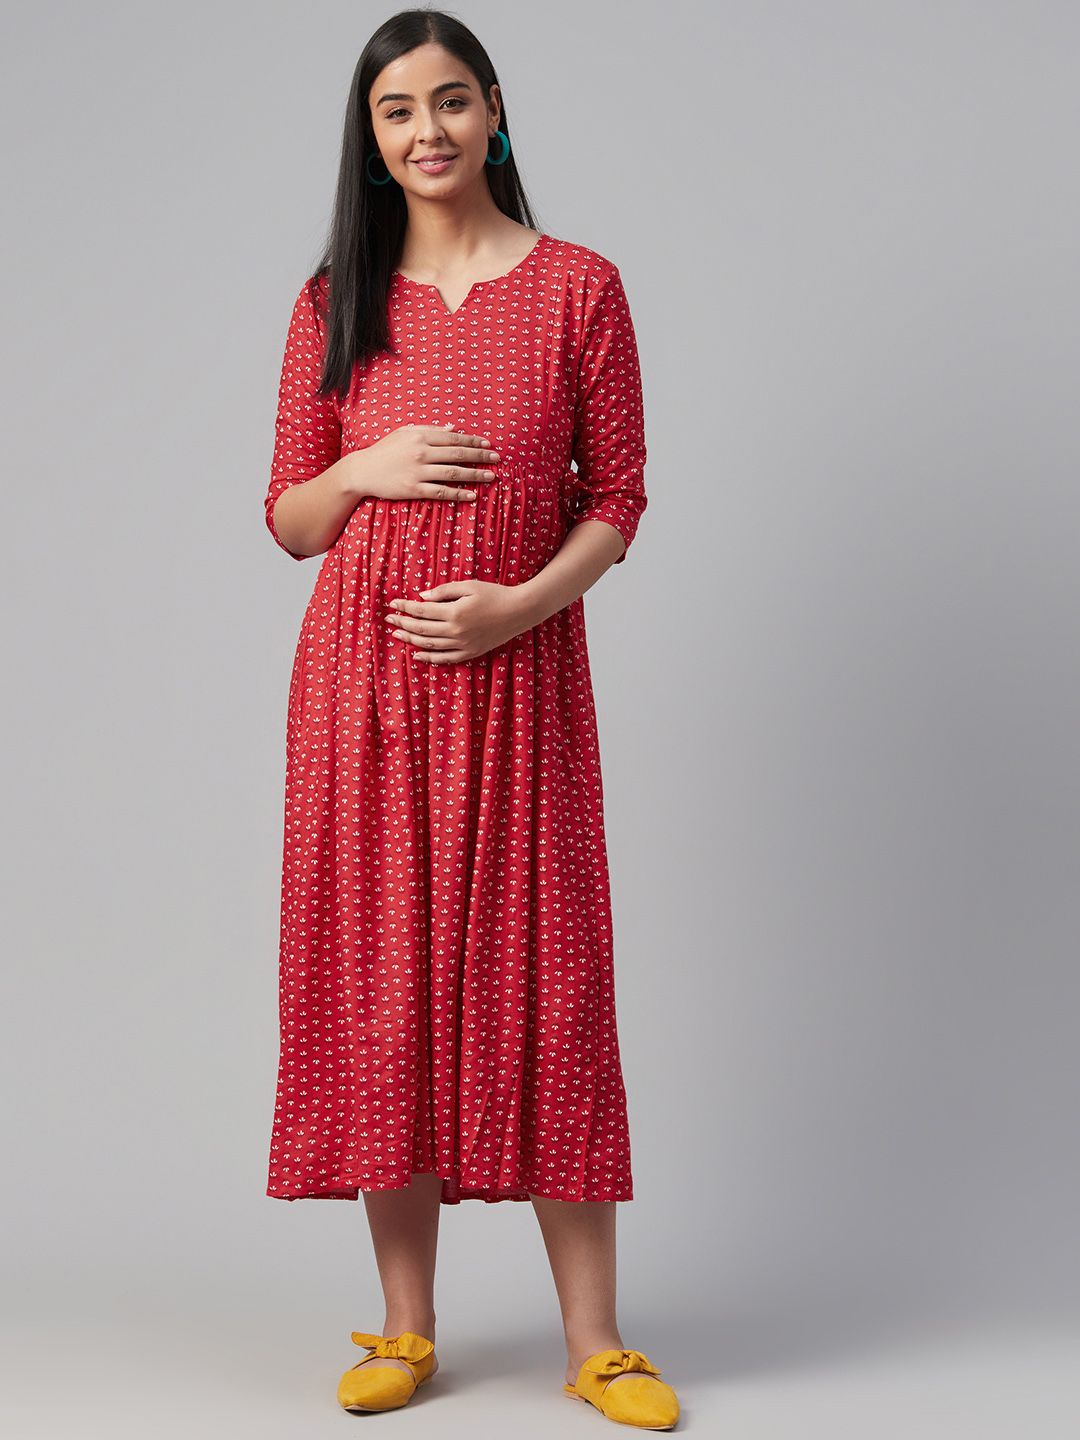 anayna Red & Off-White Ethnic Motifs Printed Maternity A-Line Dress Price in India